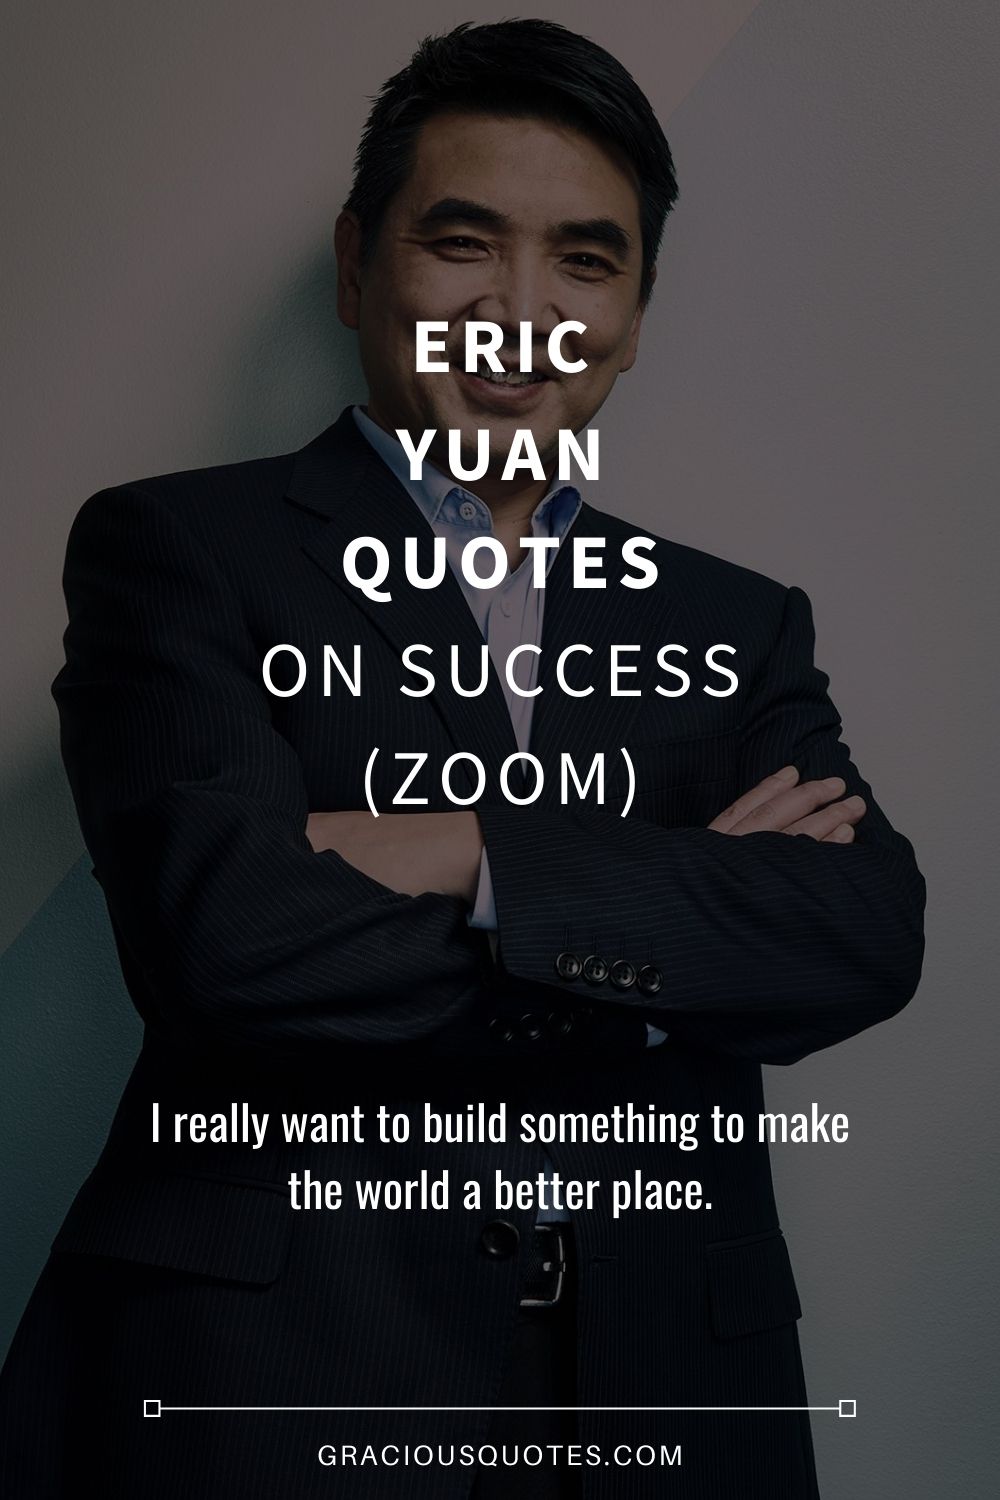 Eric Yuan Quotes on Success (ZOOM) - Gracious Quotes